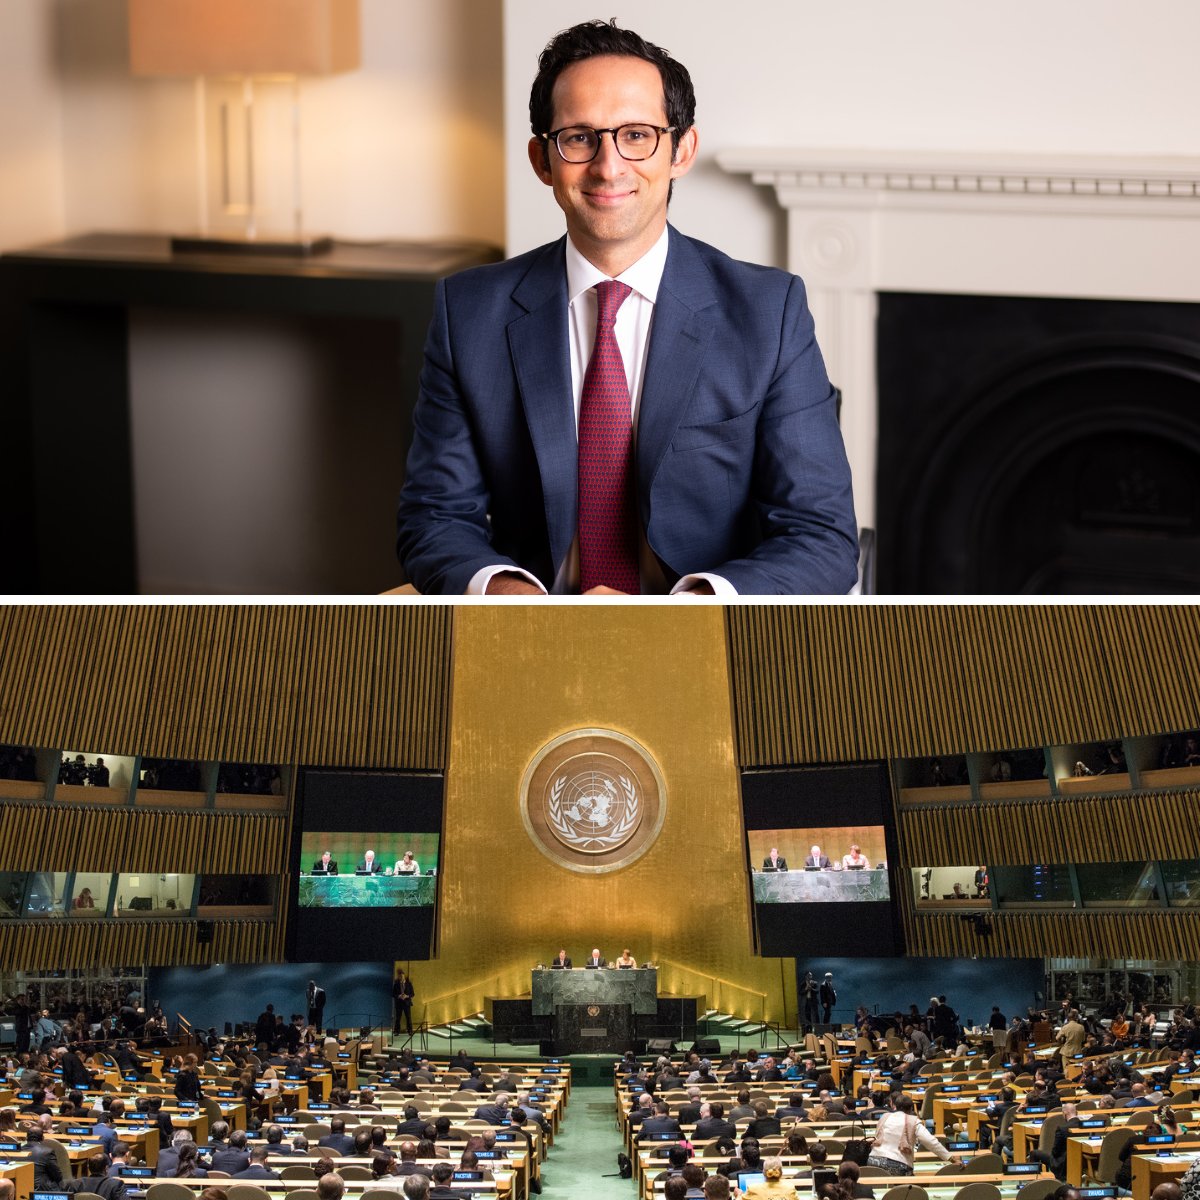 .@Can_Yeginsu will speak at the UN on World Press Freedom Day at an event hosted by US Ambassador to the UN @USAmbUN and @WSJ, with Special Rapporteur @KatzarovaM, CEO of Dow Jones @almarlatour and Permanent Representative of Greece to the UN @evasekeris. 3vb.com/can-yeginsu-to…